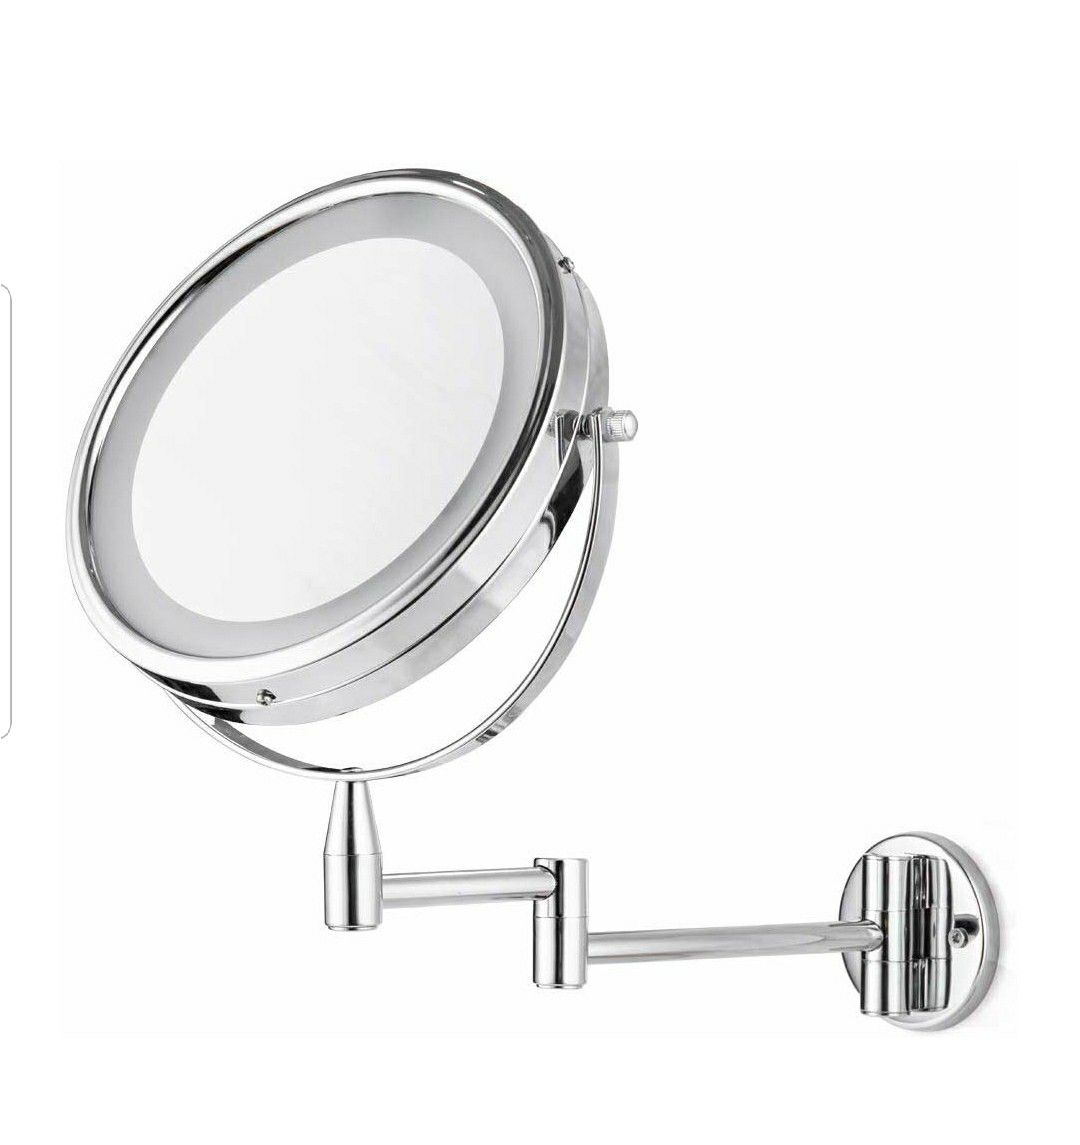 FIRMLOC Lighted Led Vanity Makeup Mirror 1X/7X Magnification Wall Mounted, 8" Double Side, Adjustable Rotating Function,